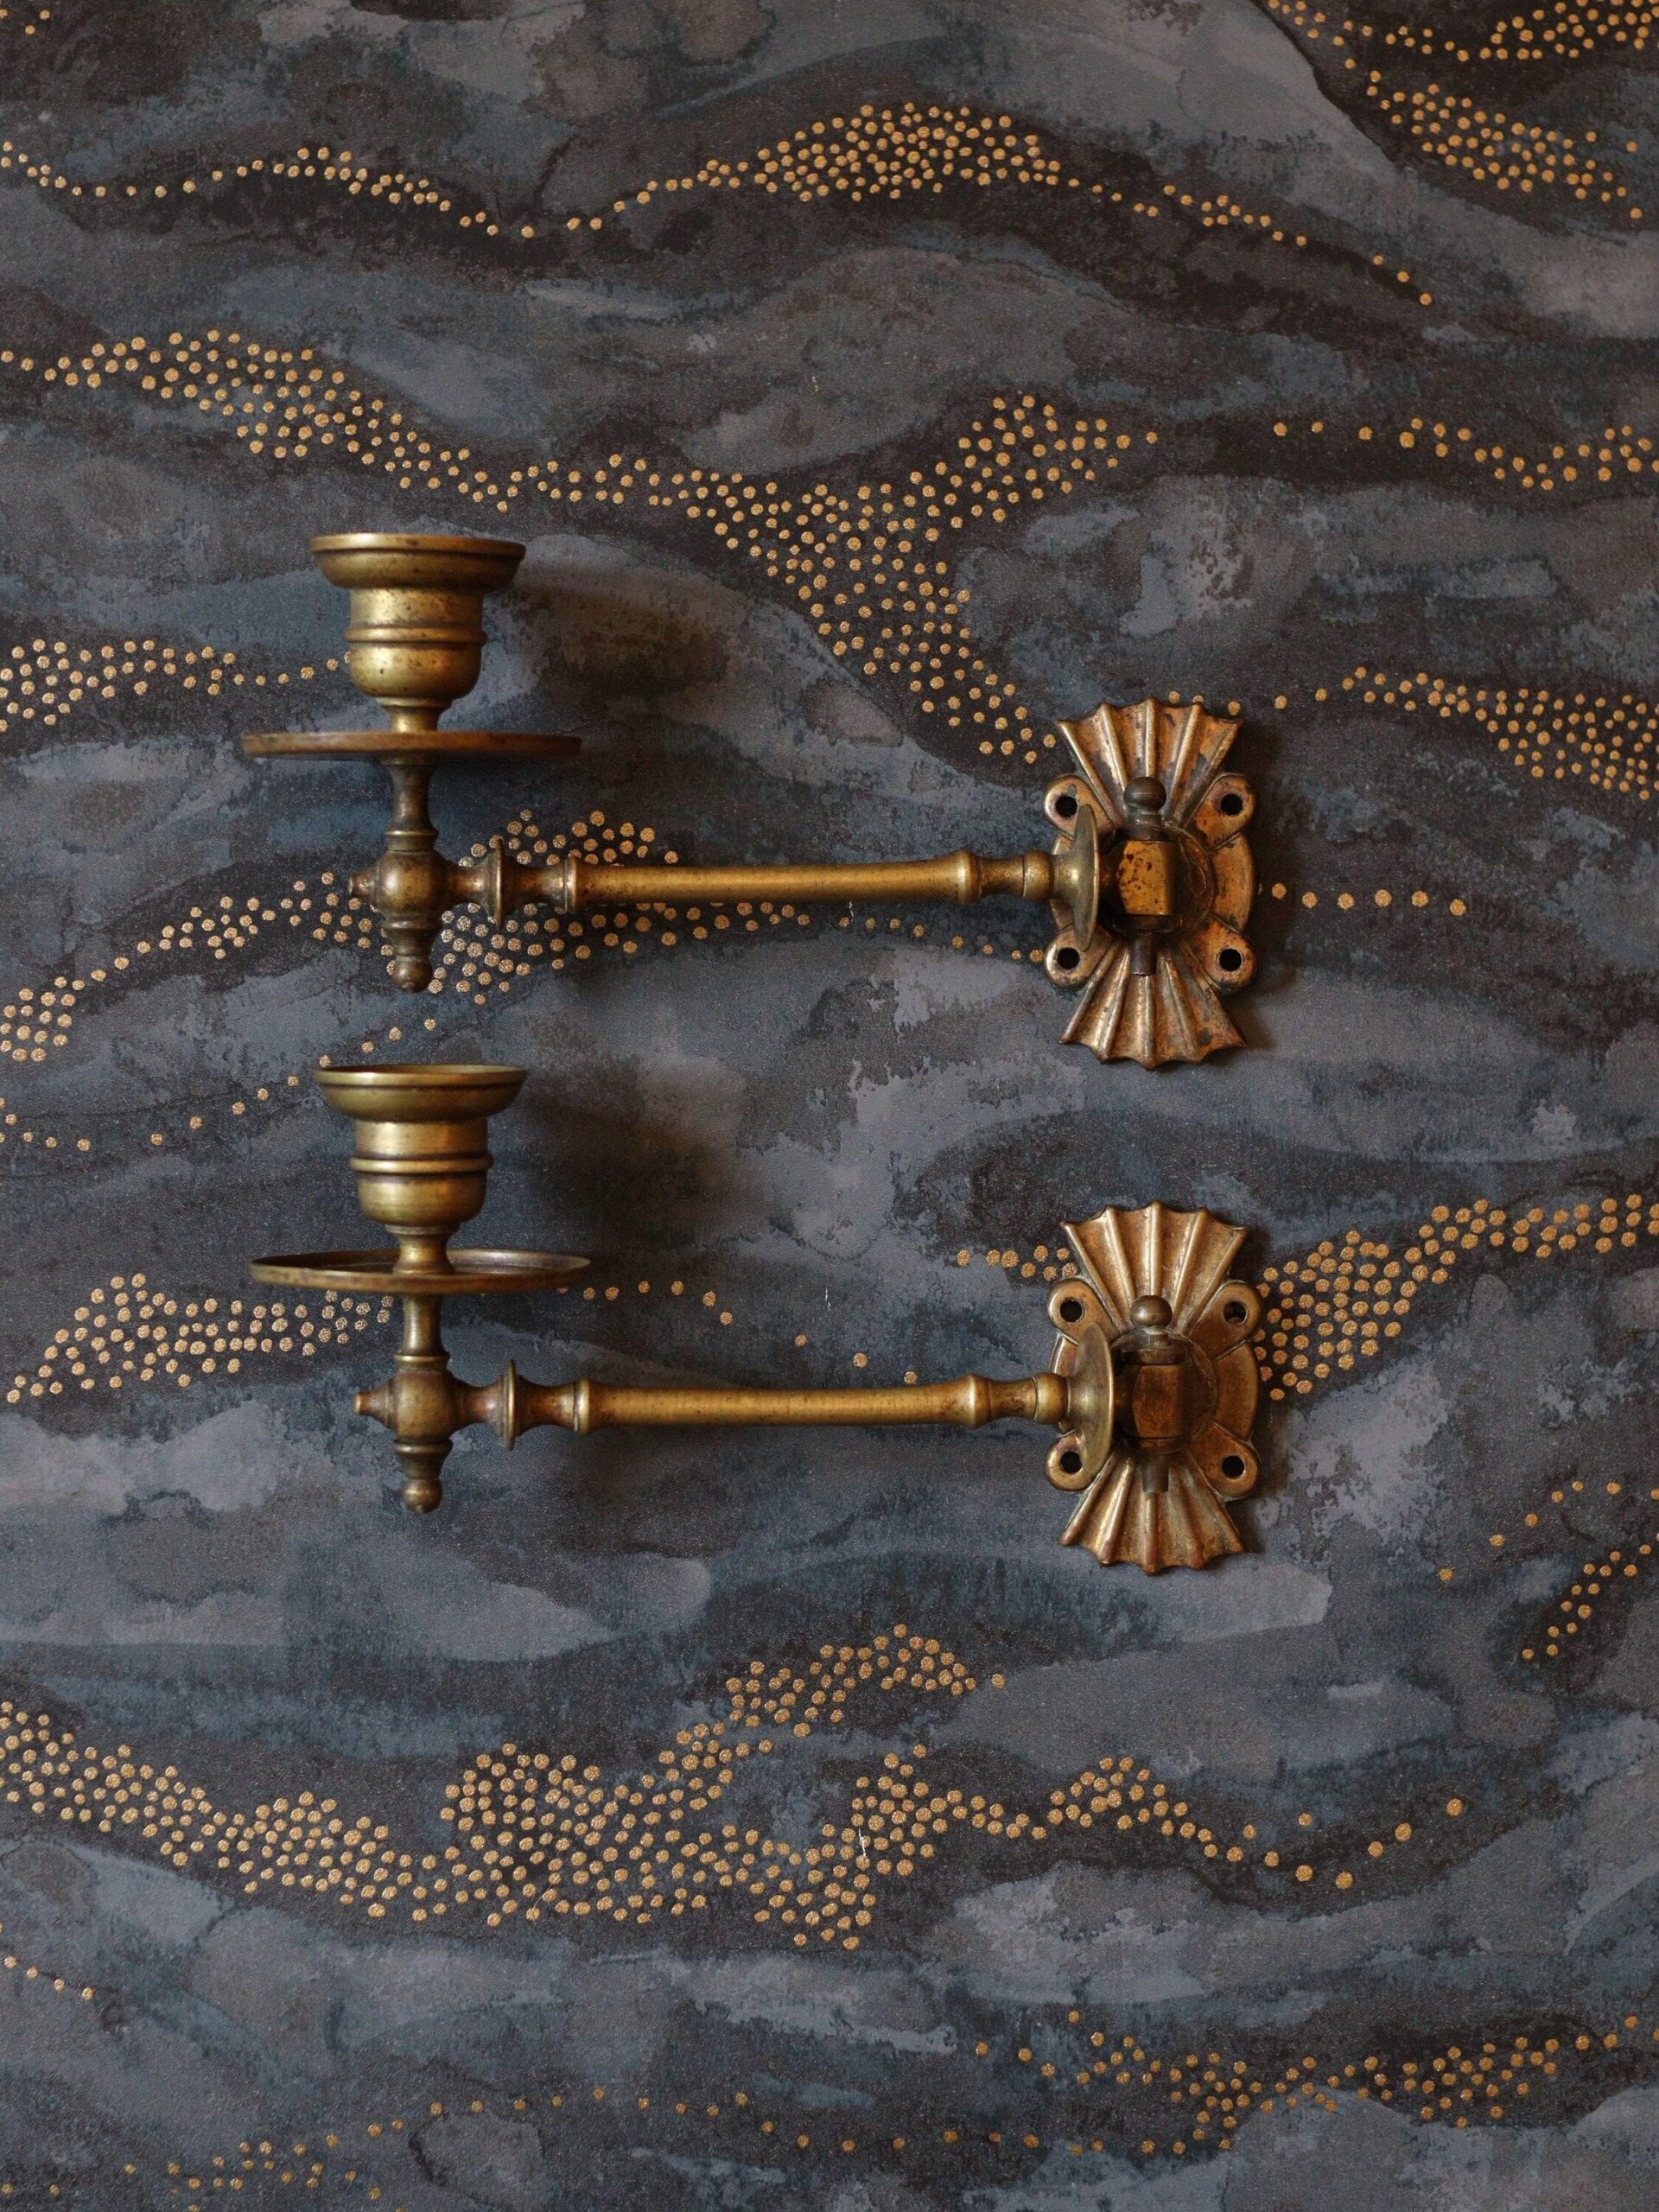 Wall-Mounted Candlestick : Stylish Wall-Mounted Candlestick Adds Elegance to Any Room